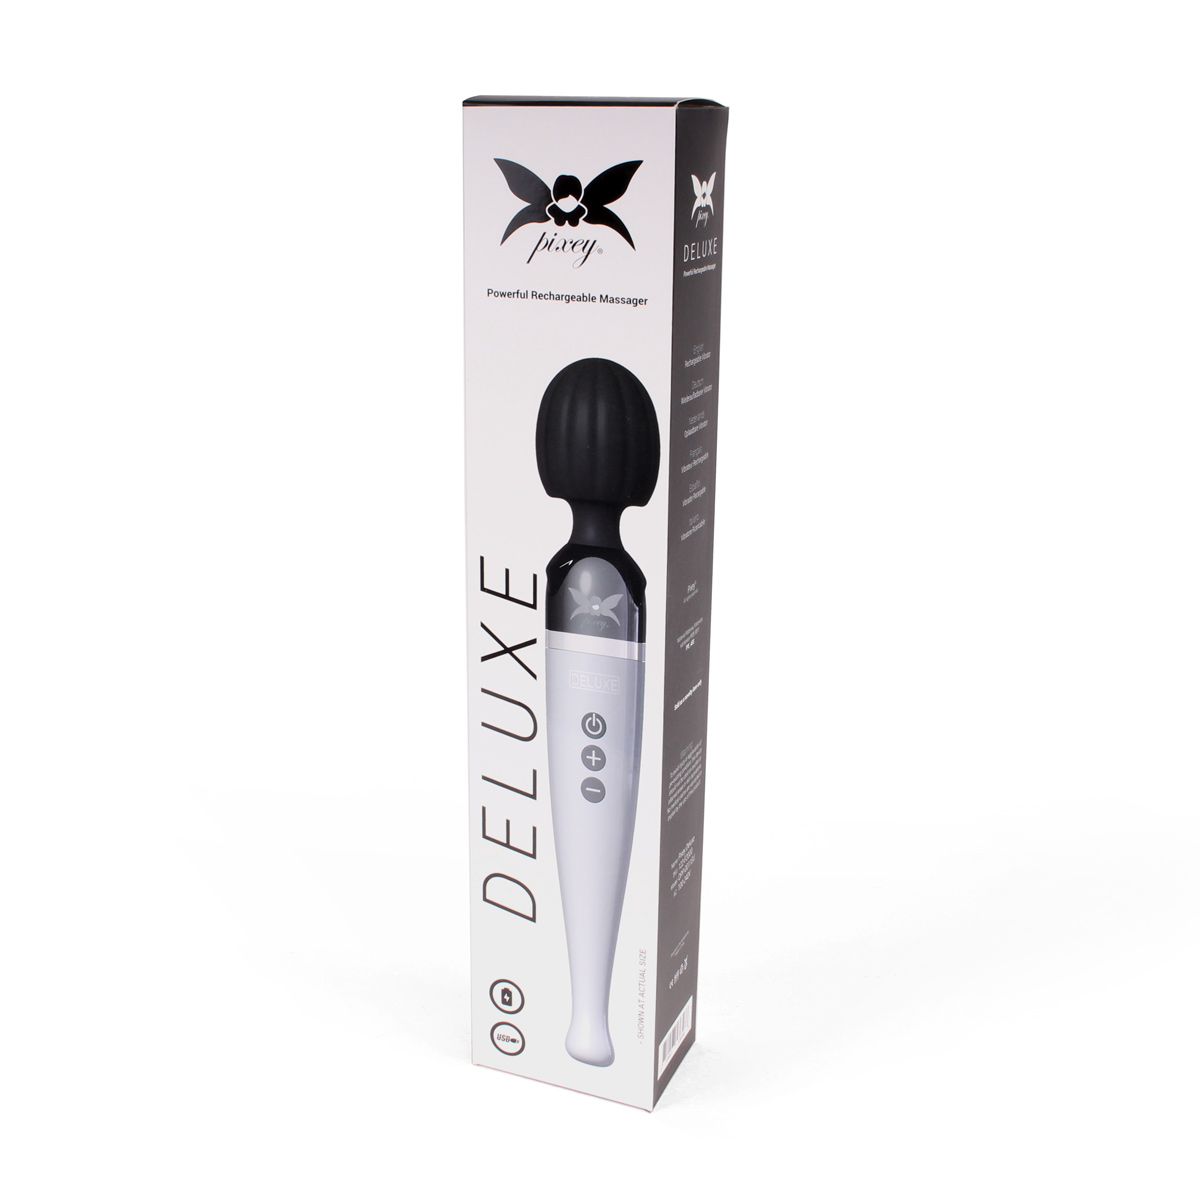 Pixey-Deluxe-Rechargeable-Wireless-Wand-122-F2000-9